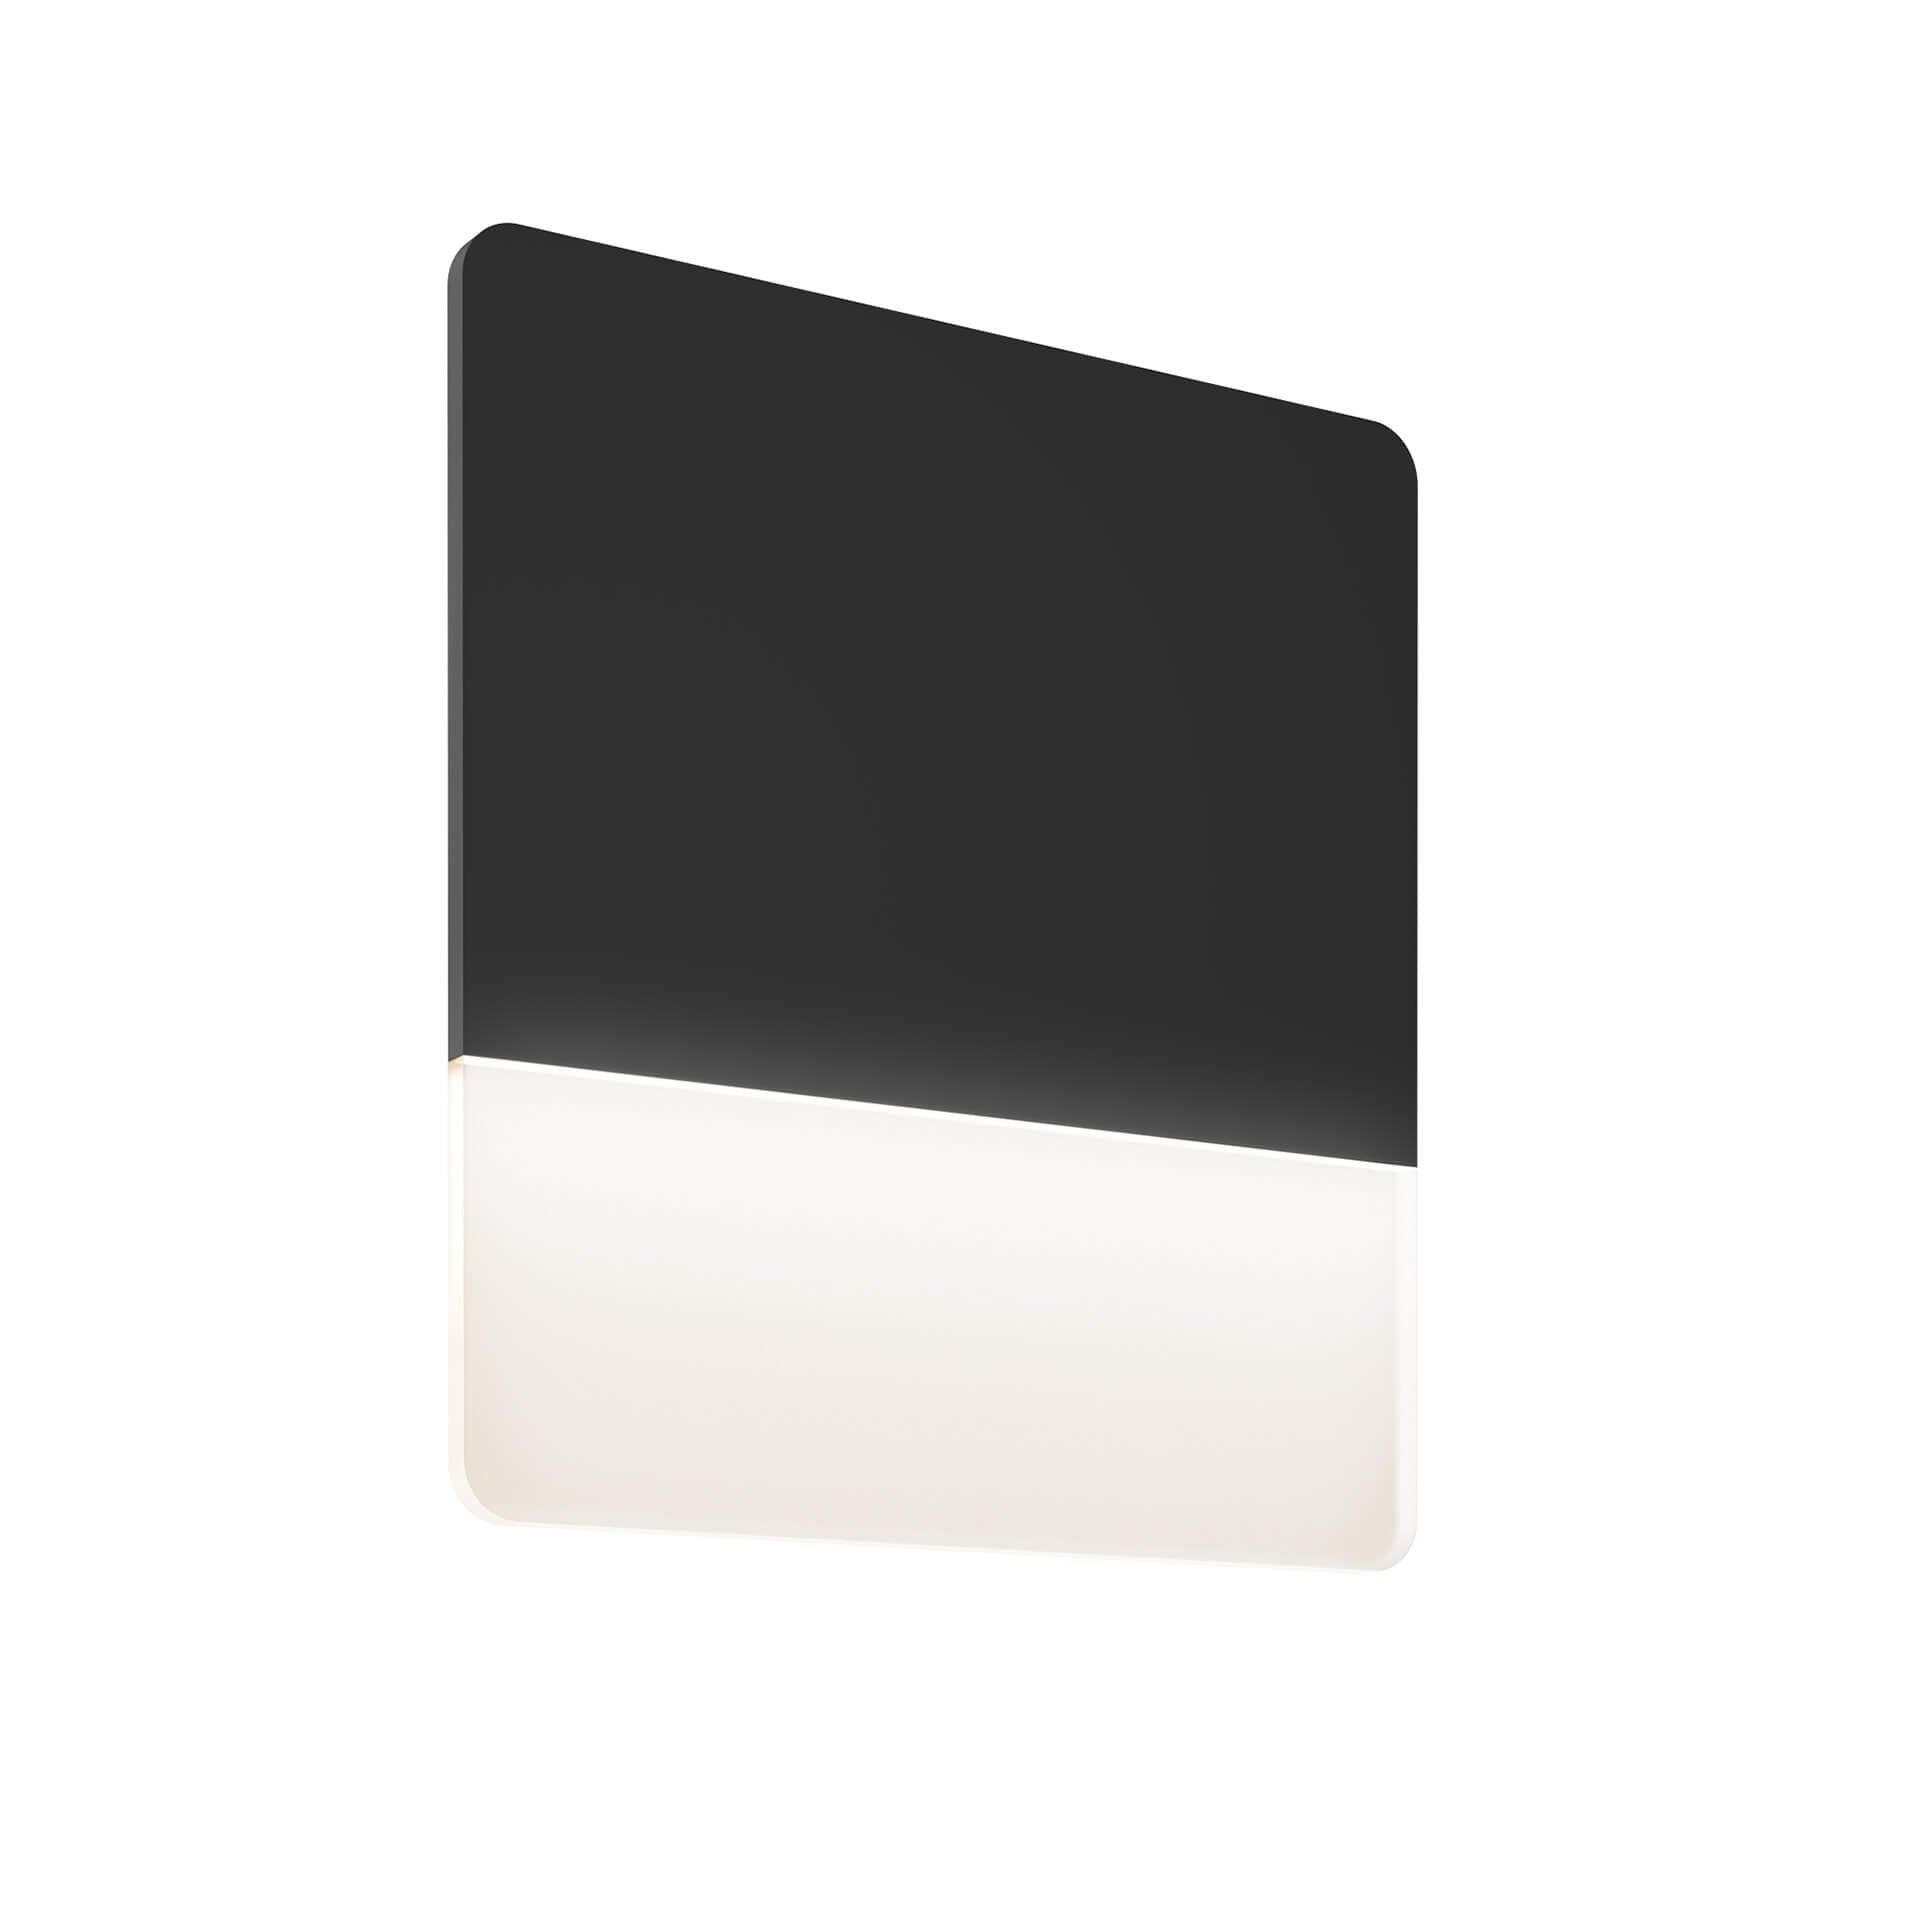 ALTO Outdoor wall lighting Black INTEGRATED LED - SQS15-3K-BK | DALS